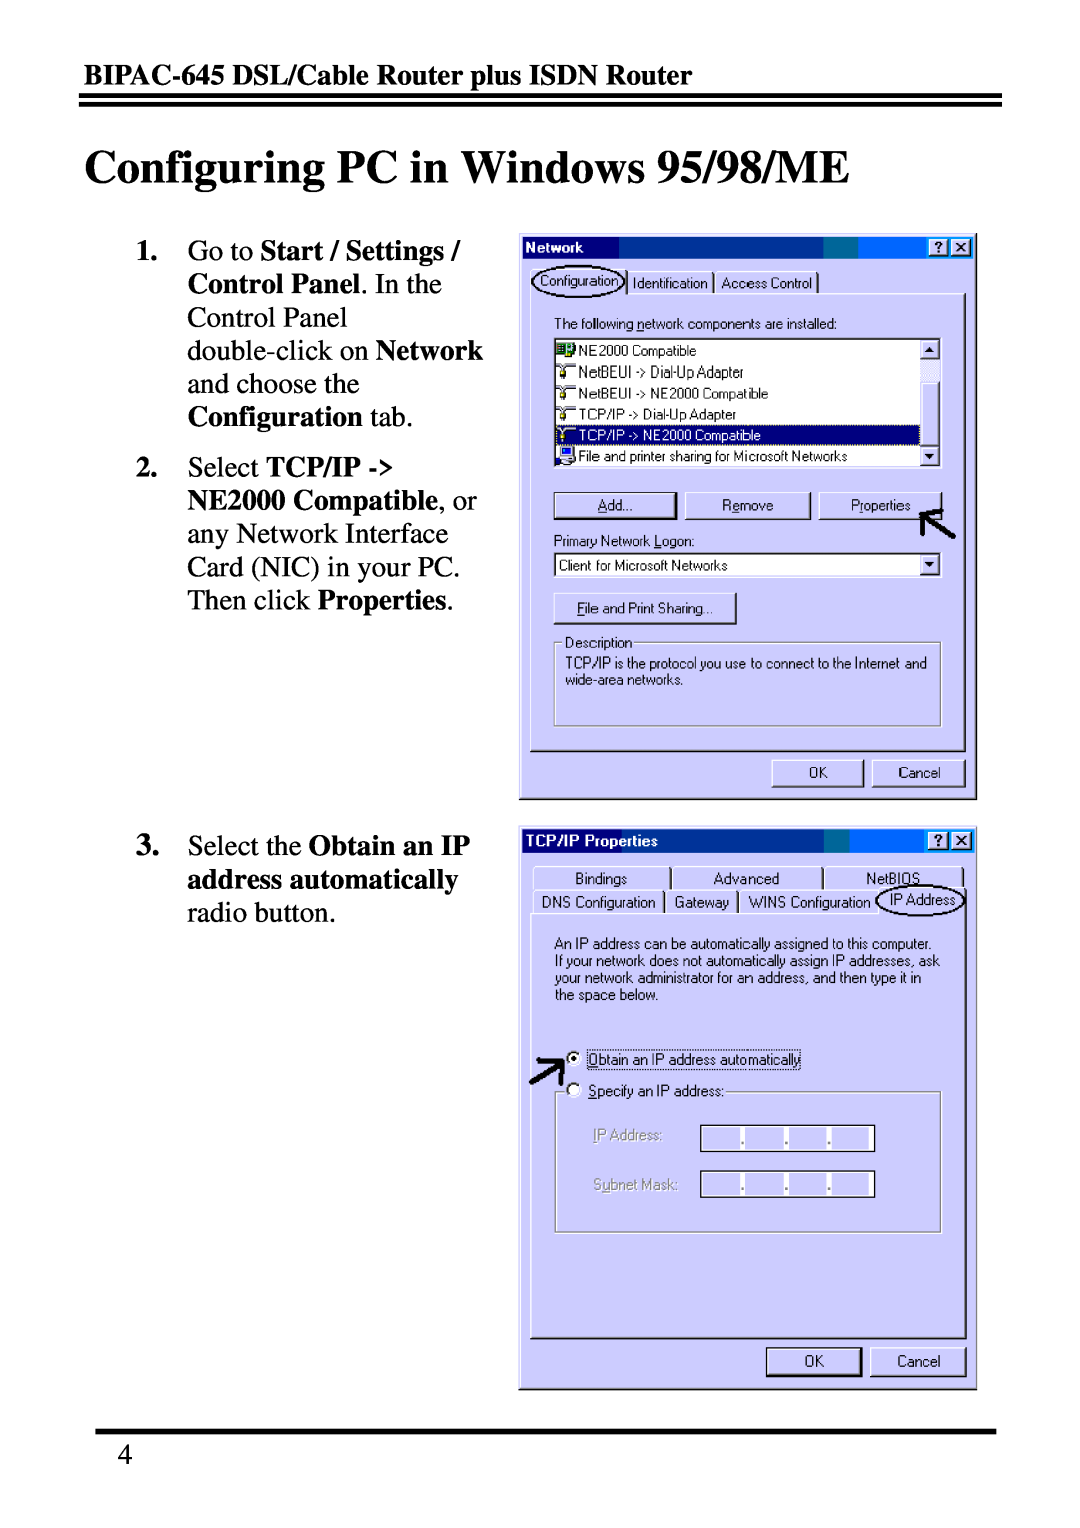 Billion Electric Company quick start Configuring PC in Windows 95/98/ME, BIPAC-645 DSL/Cable Router plus ISDN Router 